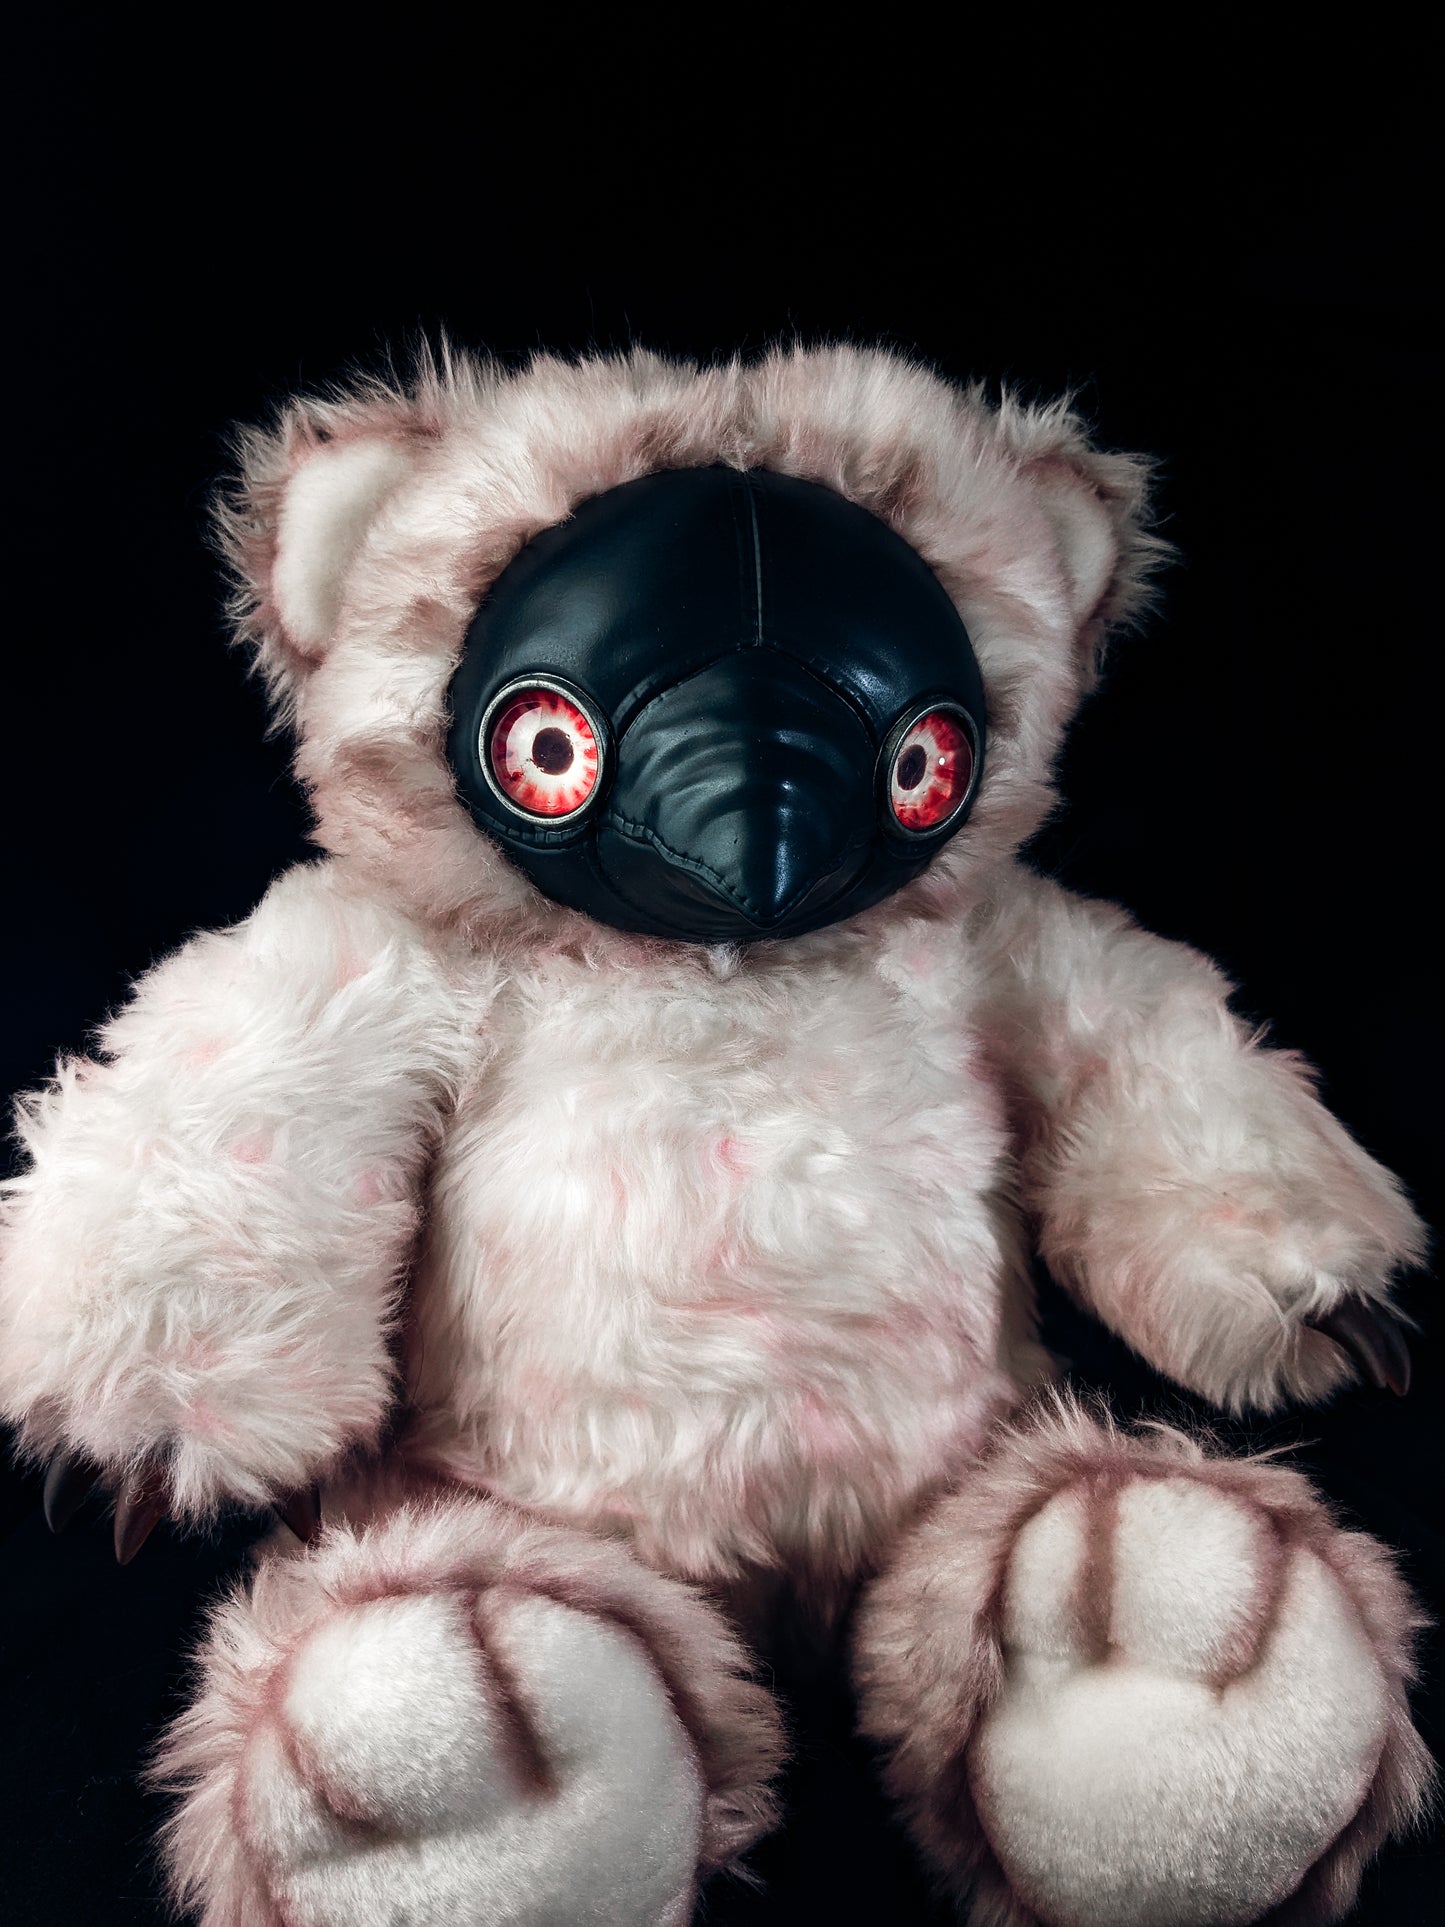 Manic Malpractice: AMBROISE - CRYPTCRITZ Handcrafted Creepy Cute Plague Doctor Art Doll Plush Toy for Eccentric Souls